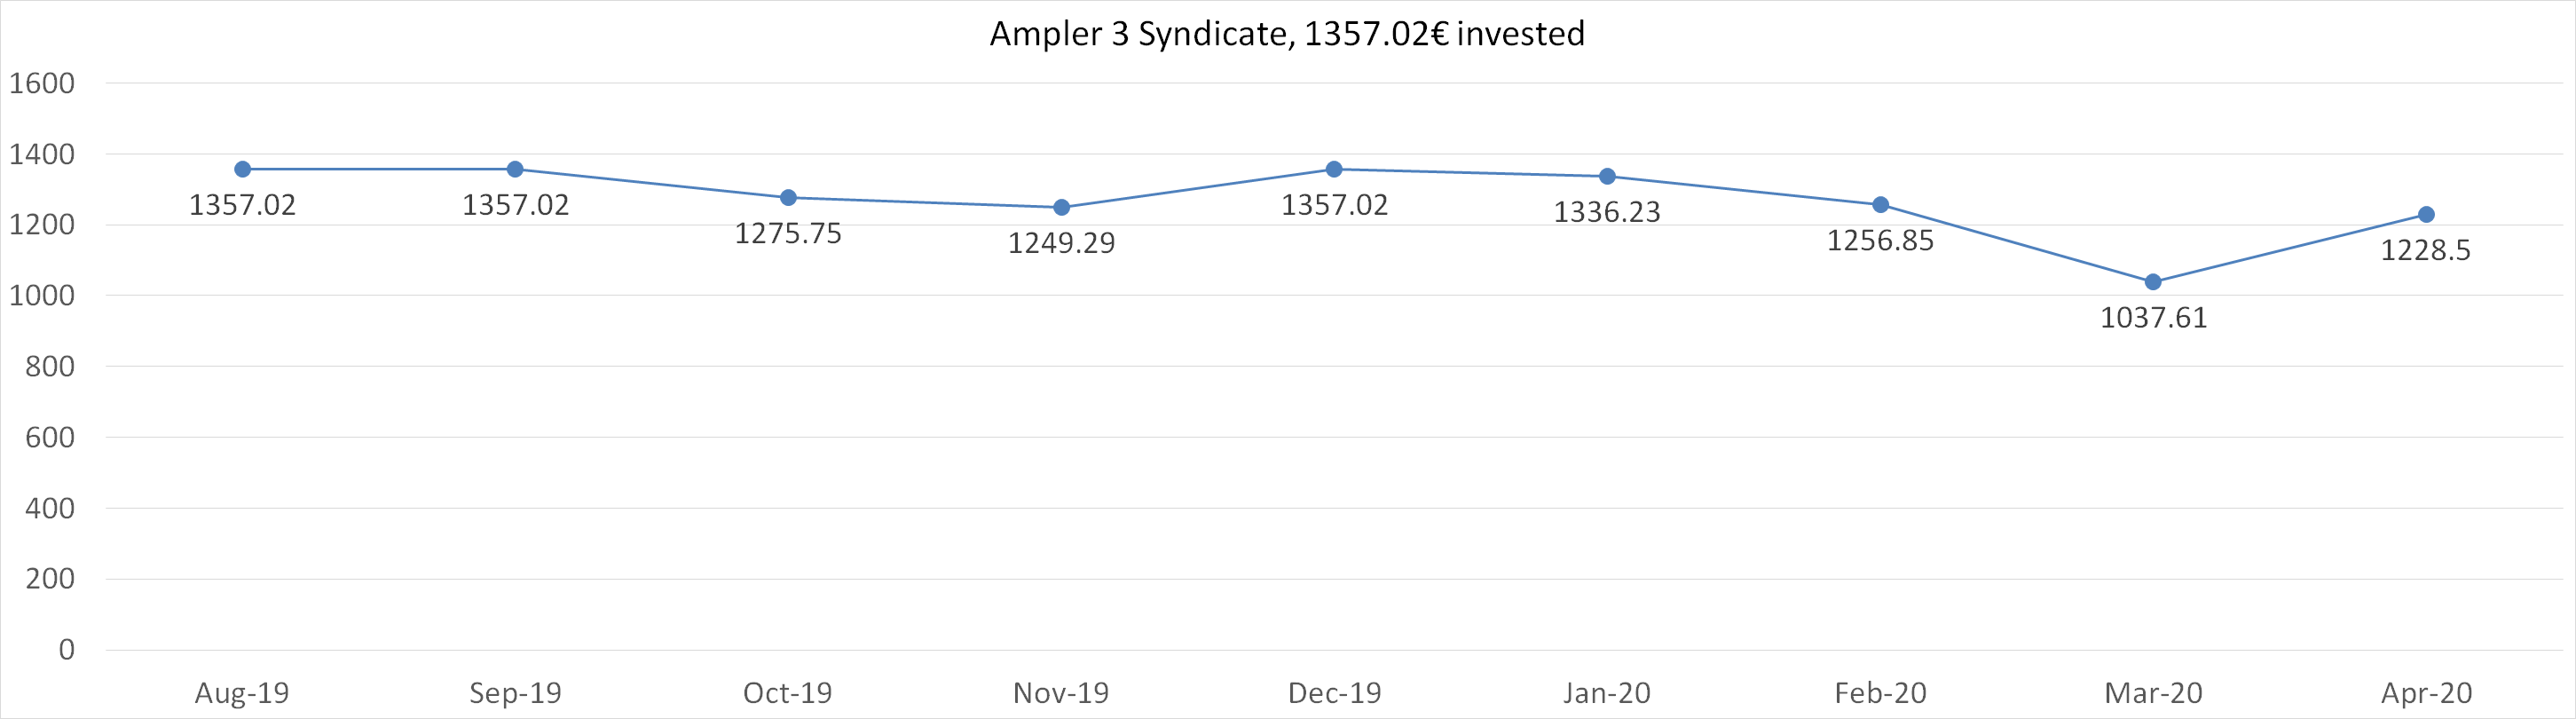 Ampler 3 syndicate net worth april 2002